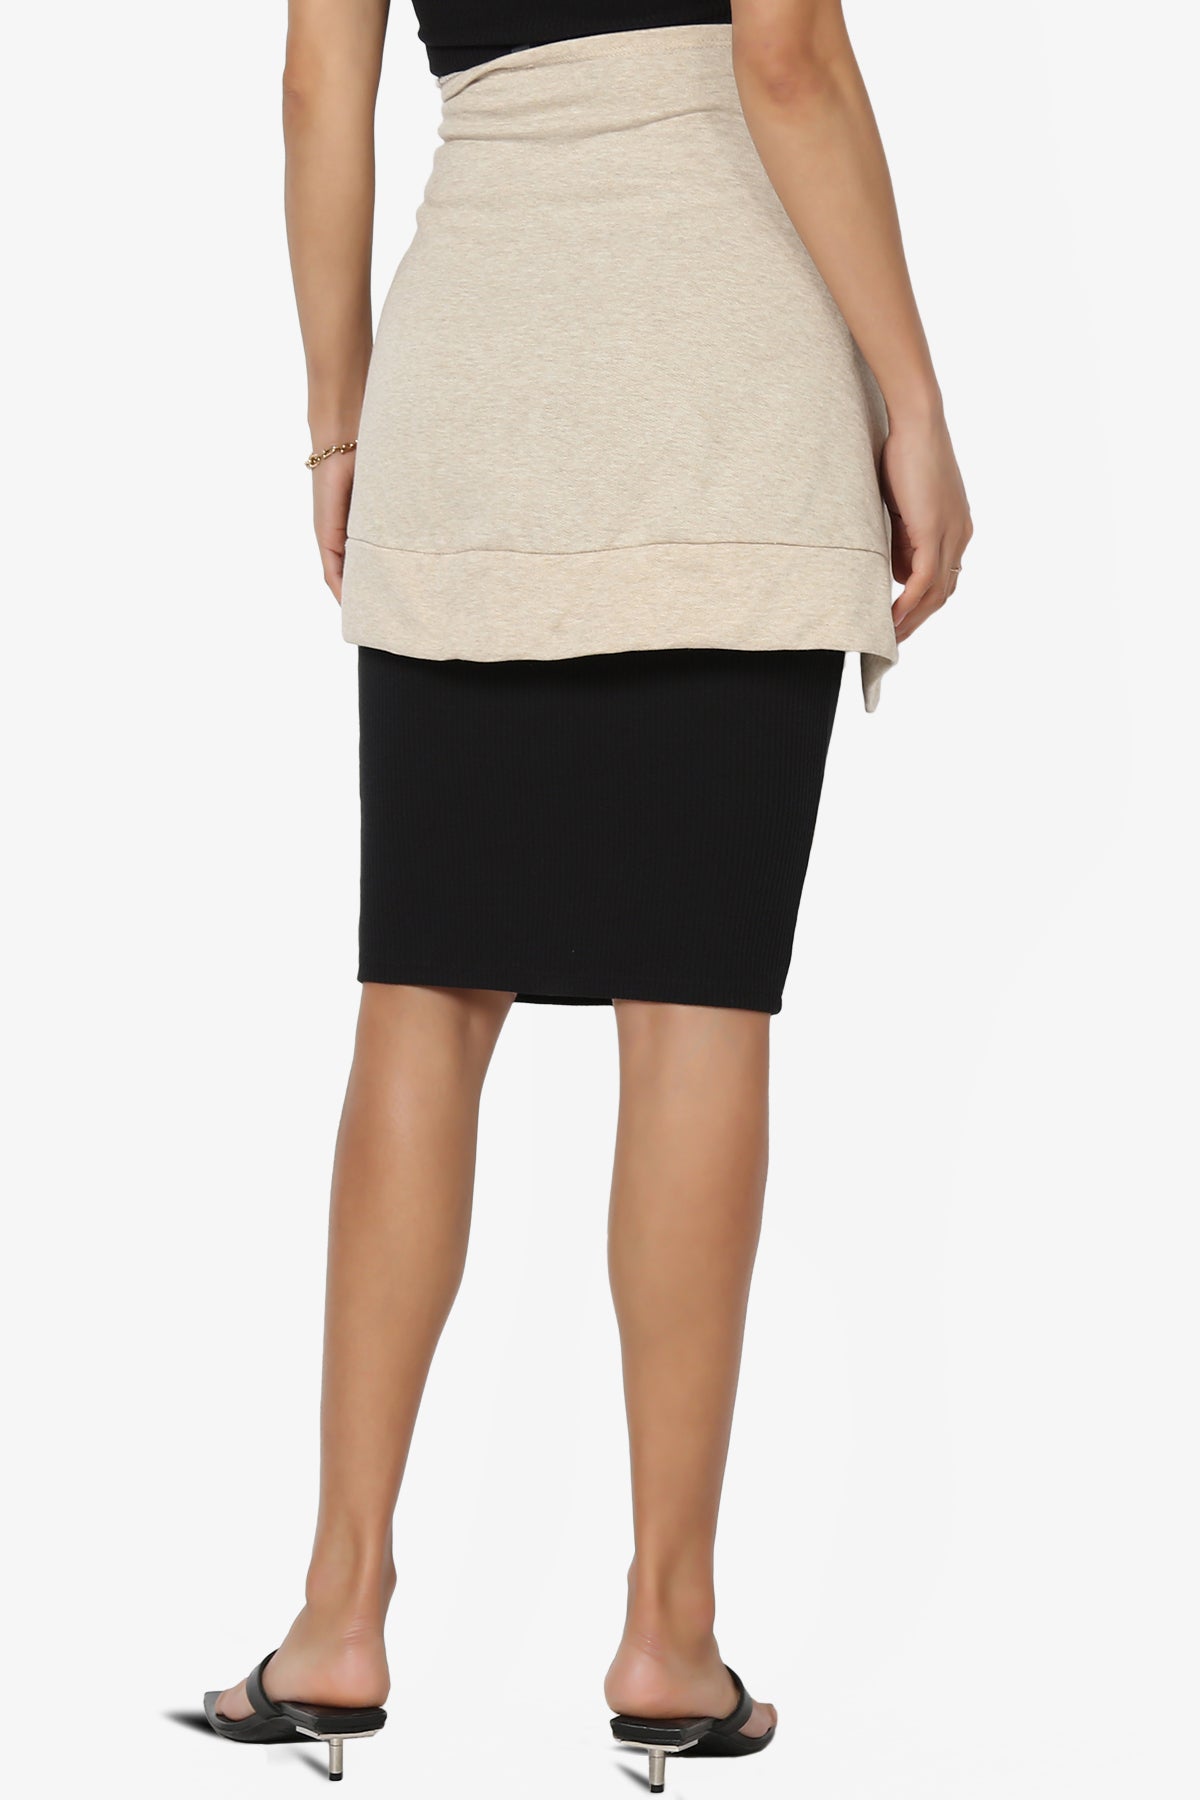 Karrigan Y Zone Hip Cover Up Wrap Skirt OATMEAL_2